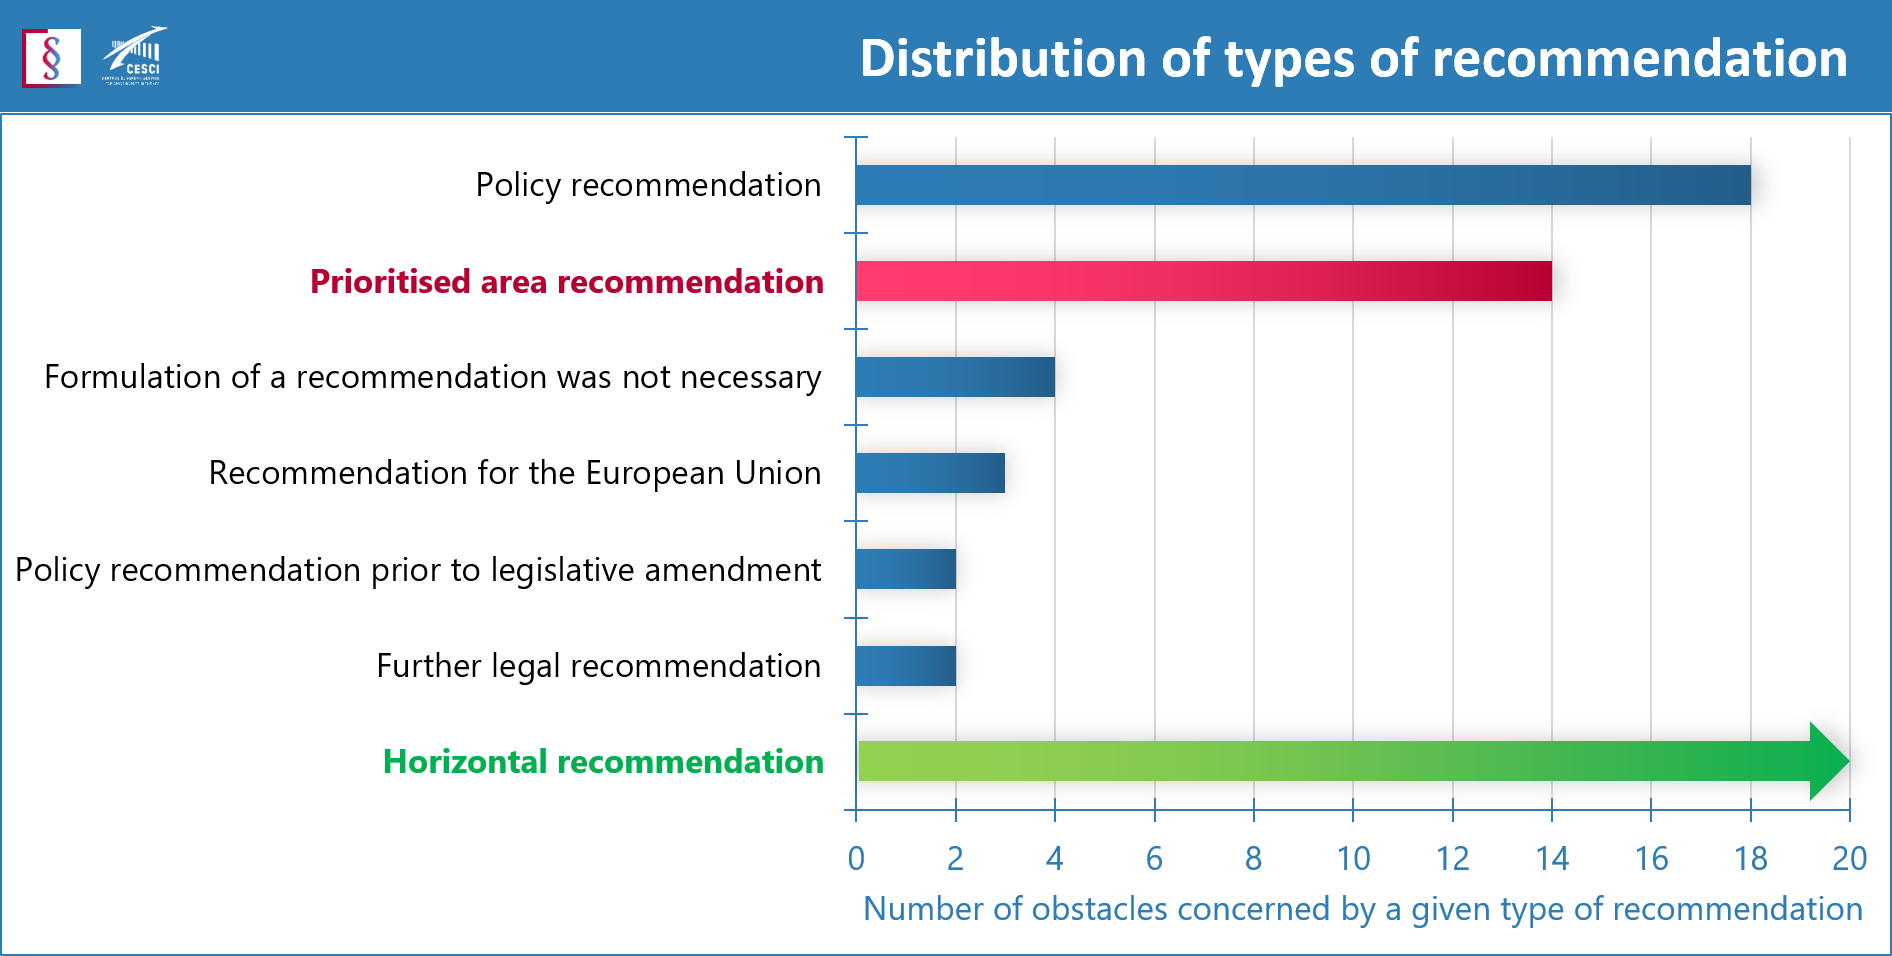 Distribution of types of recommendation